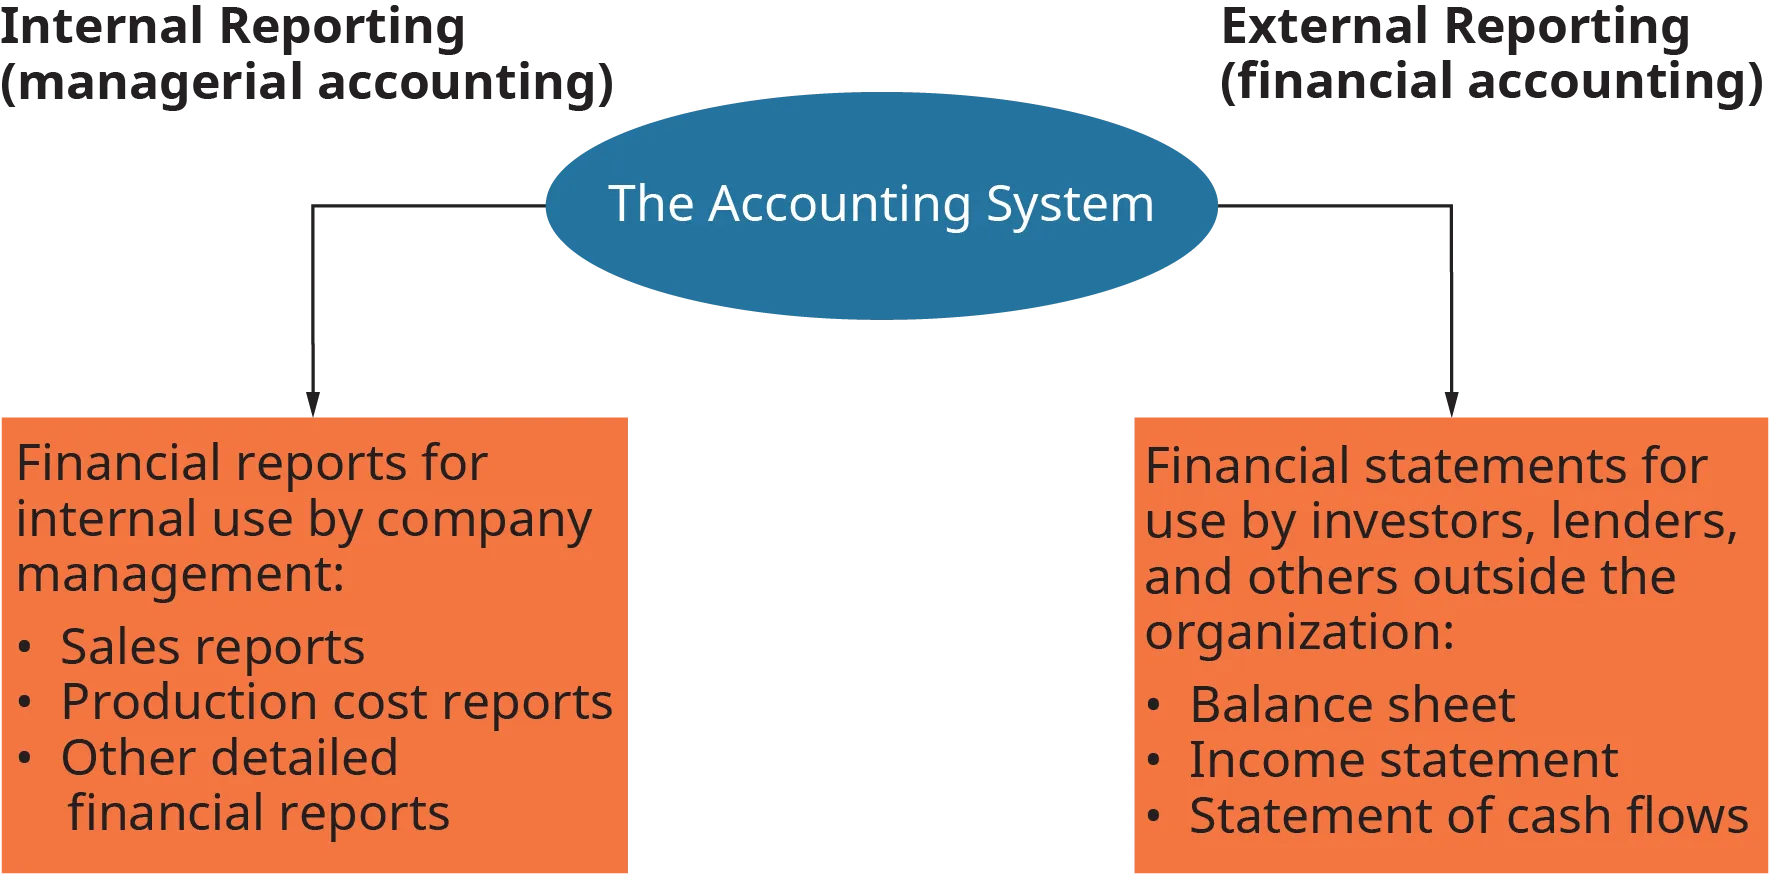 The diagram shows the accounting system at the center, and branching to the left and right. To the left is internal reporting, managerial accounting. To the right is external reporting, financial accounting. On the internal side, the diagram reads as follows. Financial reports for internal use by company management; sales reports, production cost reports, and other detailed financial reports. On the external reporting side, the diagram reads as follows. Financial statements for use by investors, lenders, and others outside the organization; balance sheet, income statement, and statement of cash flows.